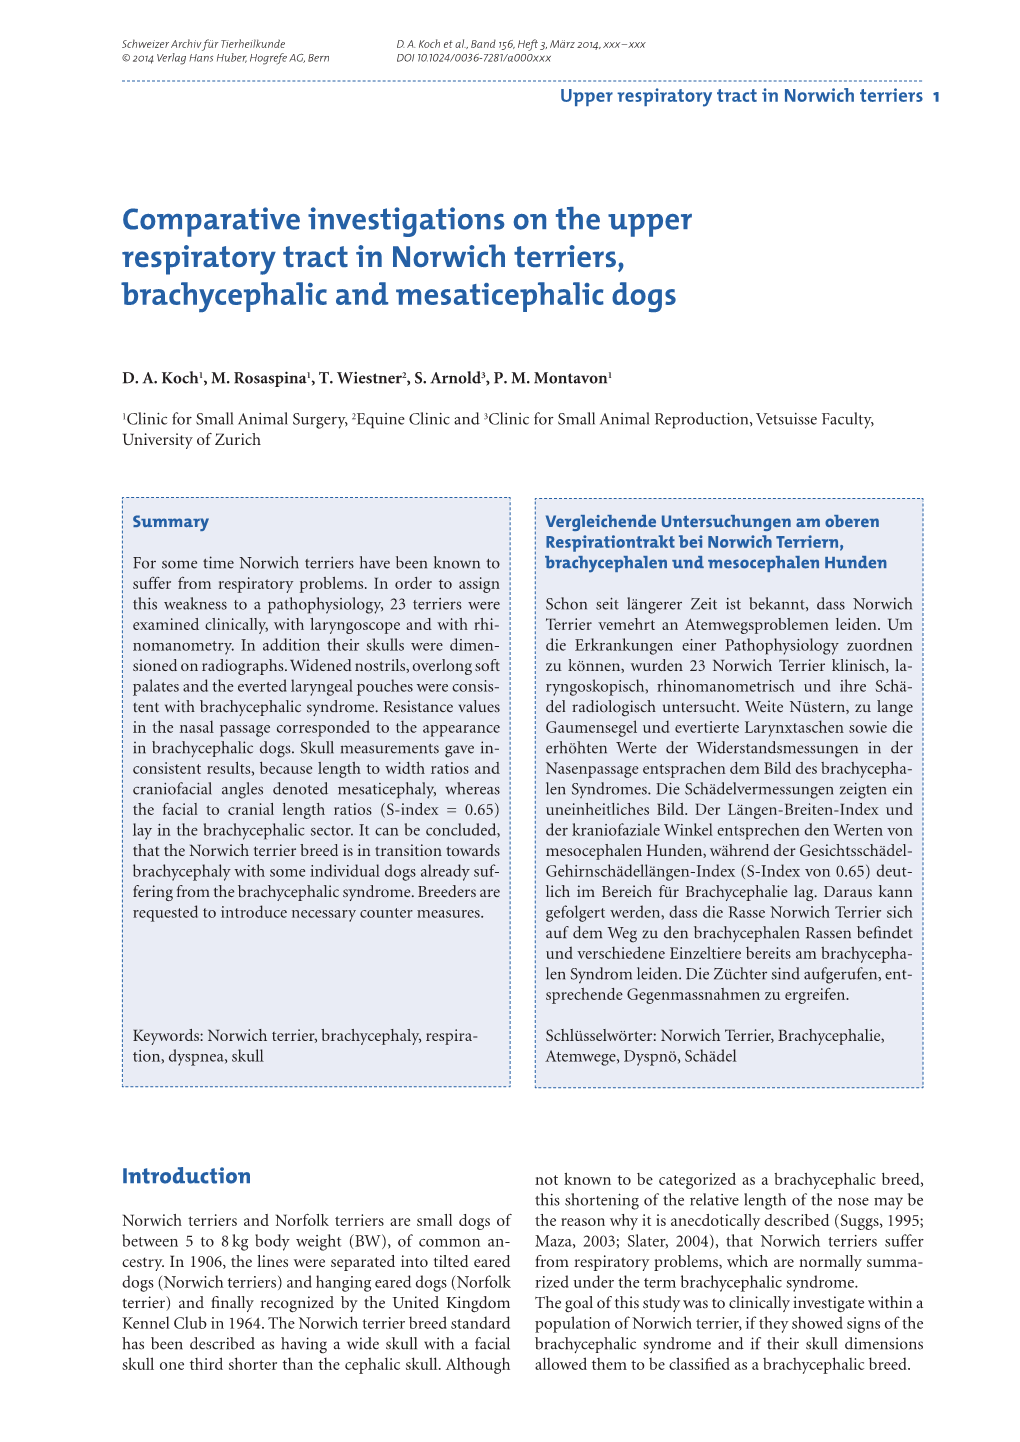 Comparative Investigations on the Upper Respiratory Tract in Norwich Terriers, Brachycephalic and Mesaticephalic Dogs